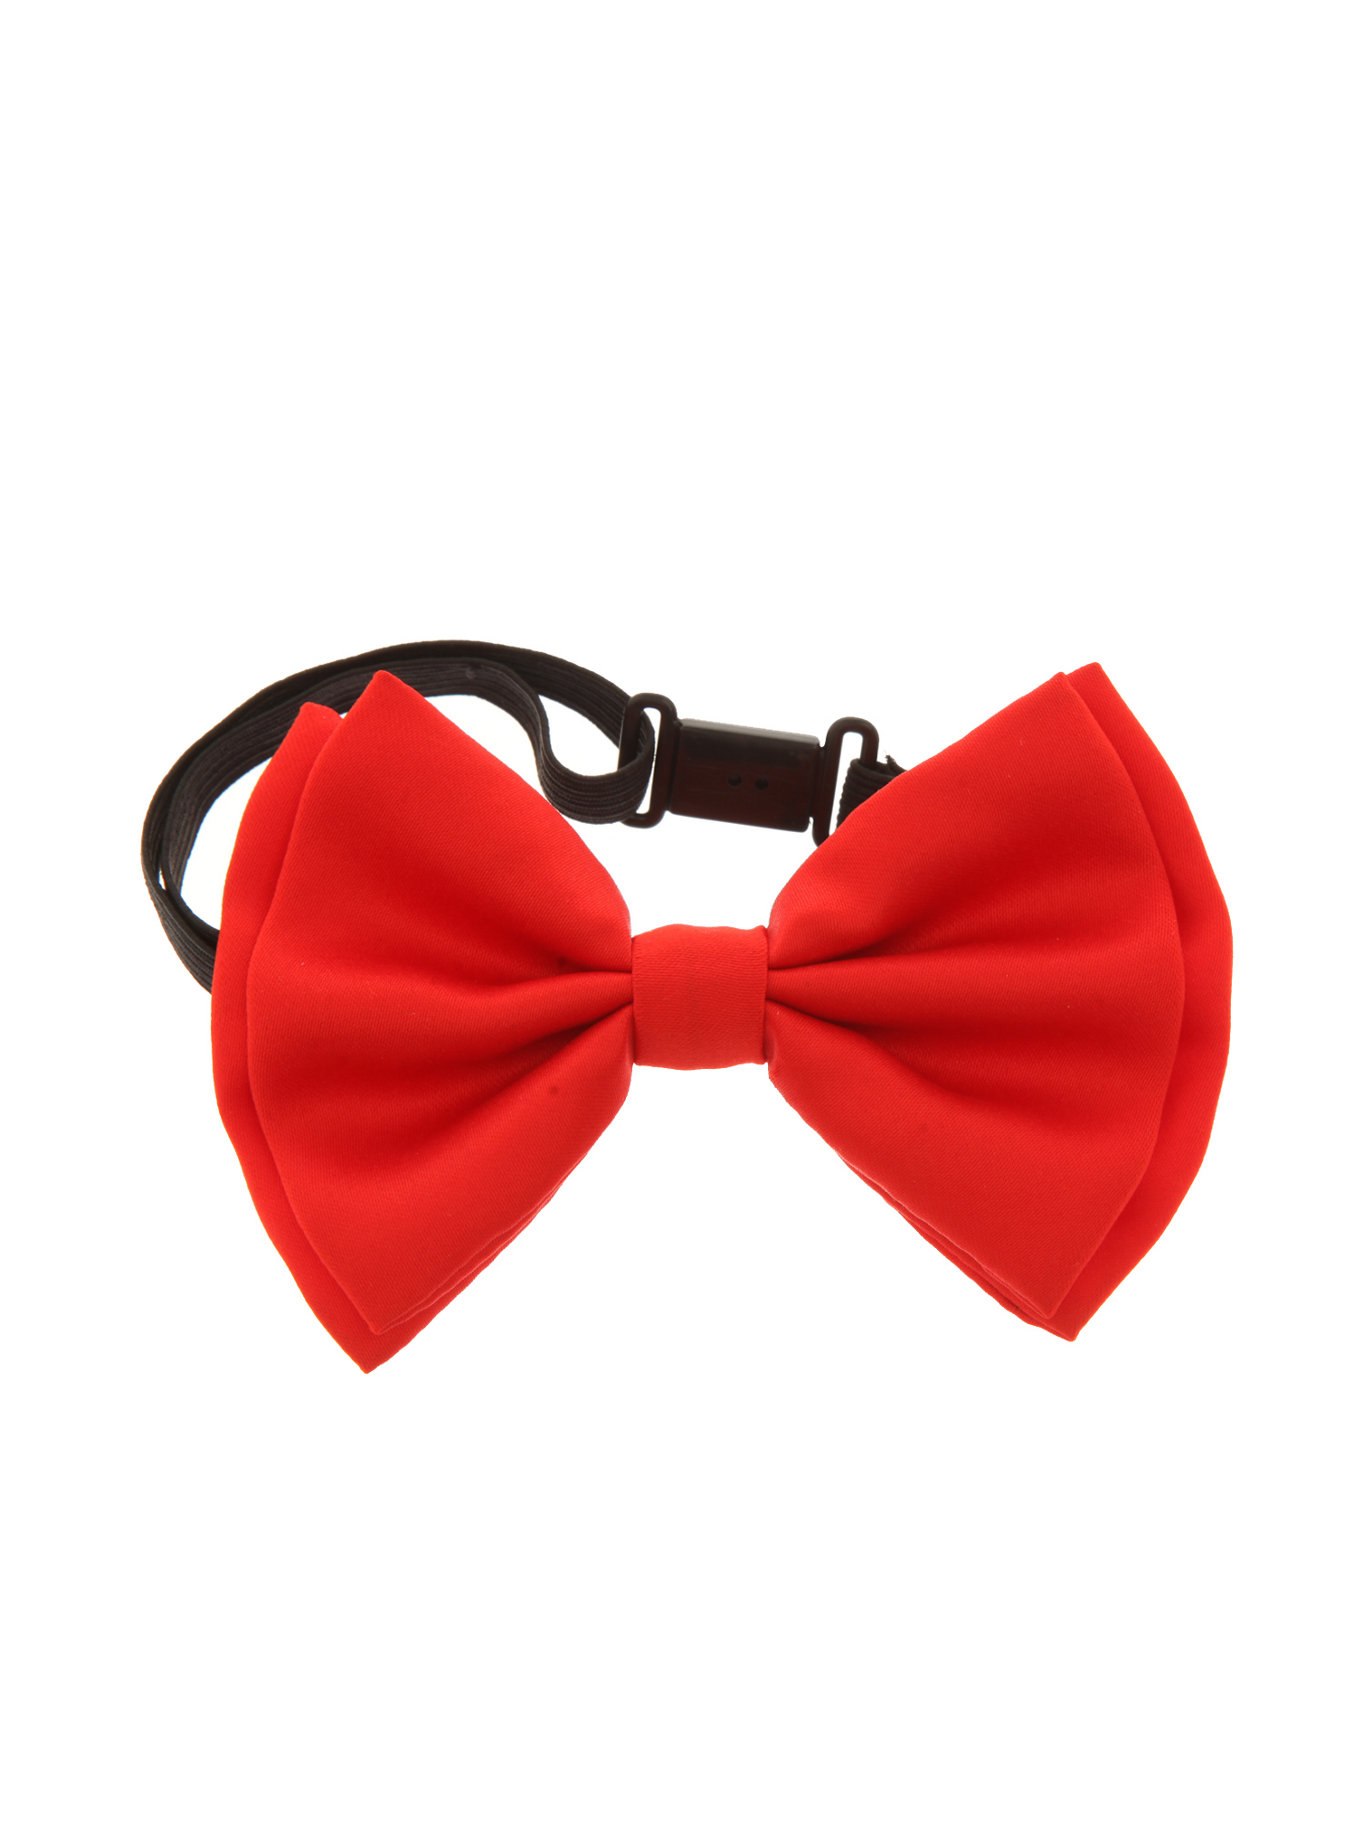 Red Bow Tie | Hot Topic